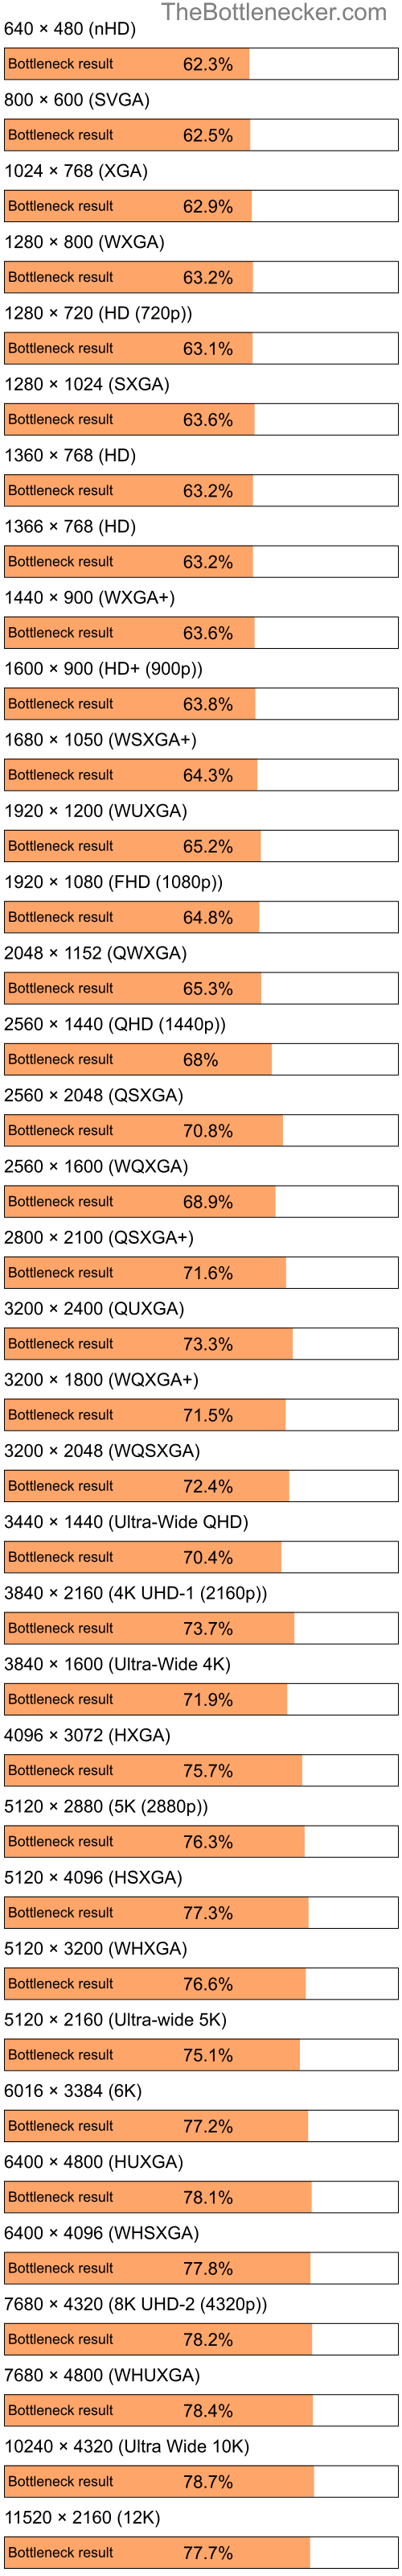 Bottleneck results by resolution for Intel Pentium 4 and AMD Radeon X1950 GT in General Tasks